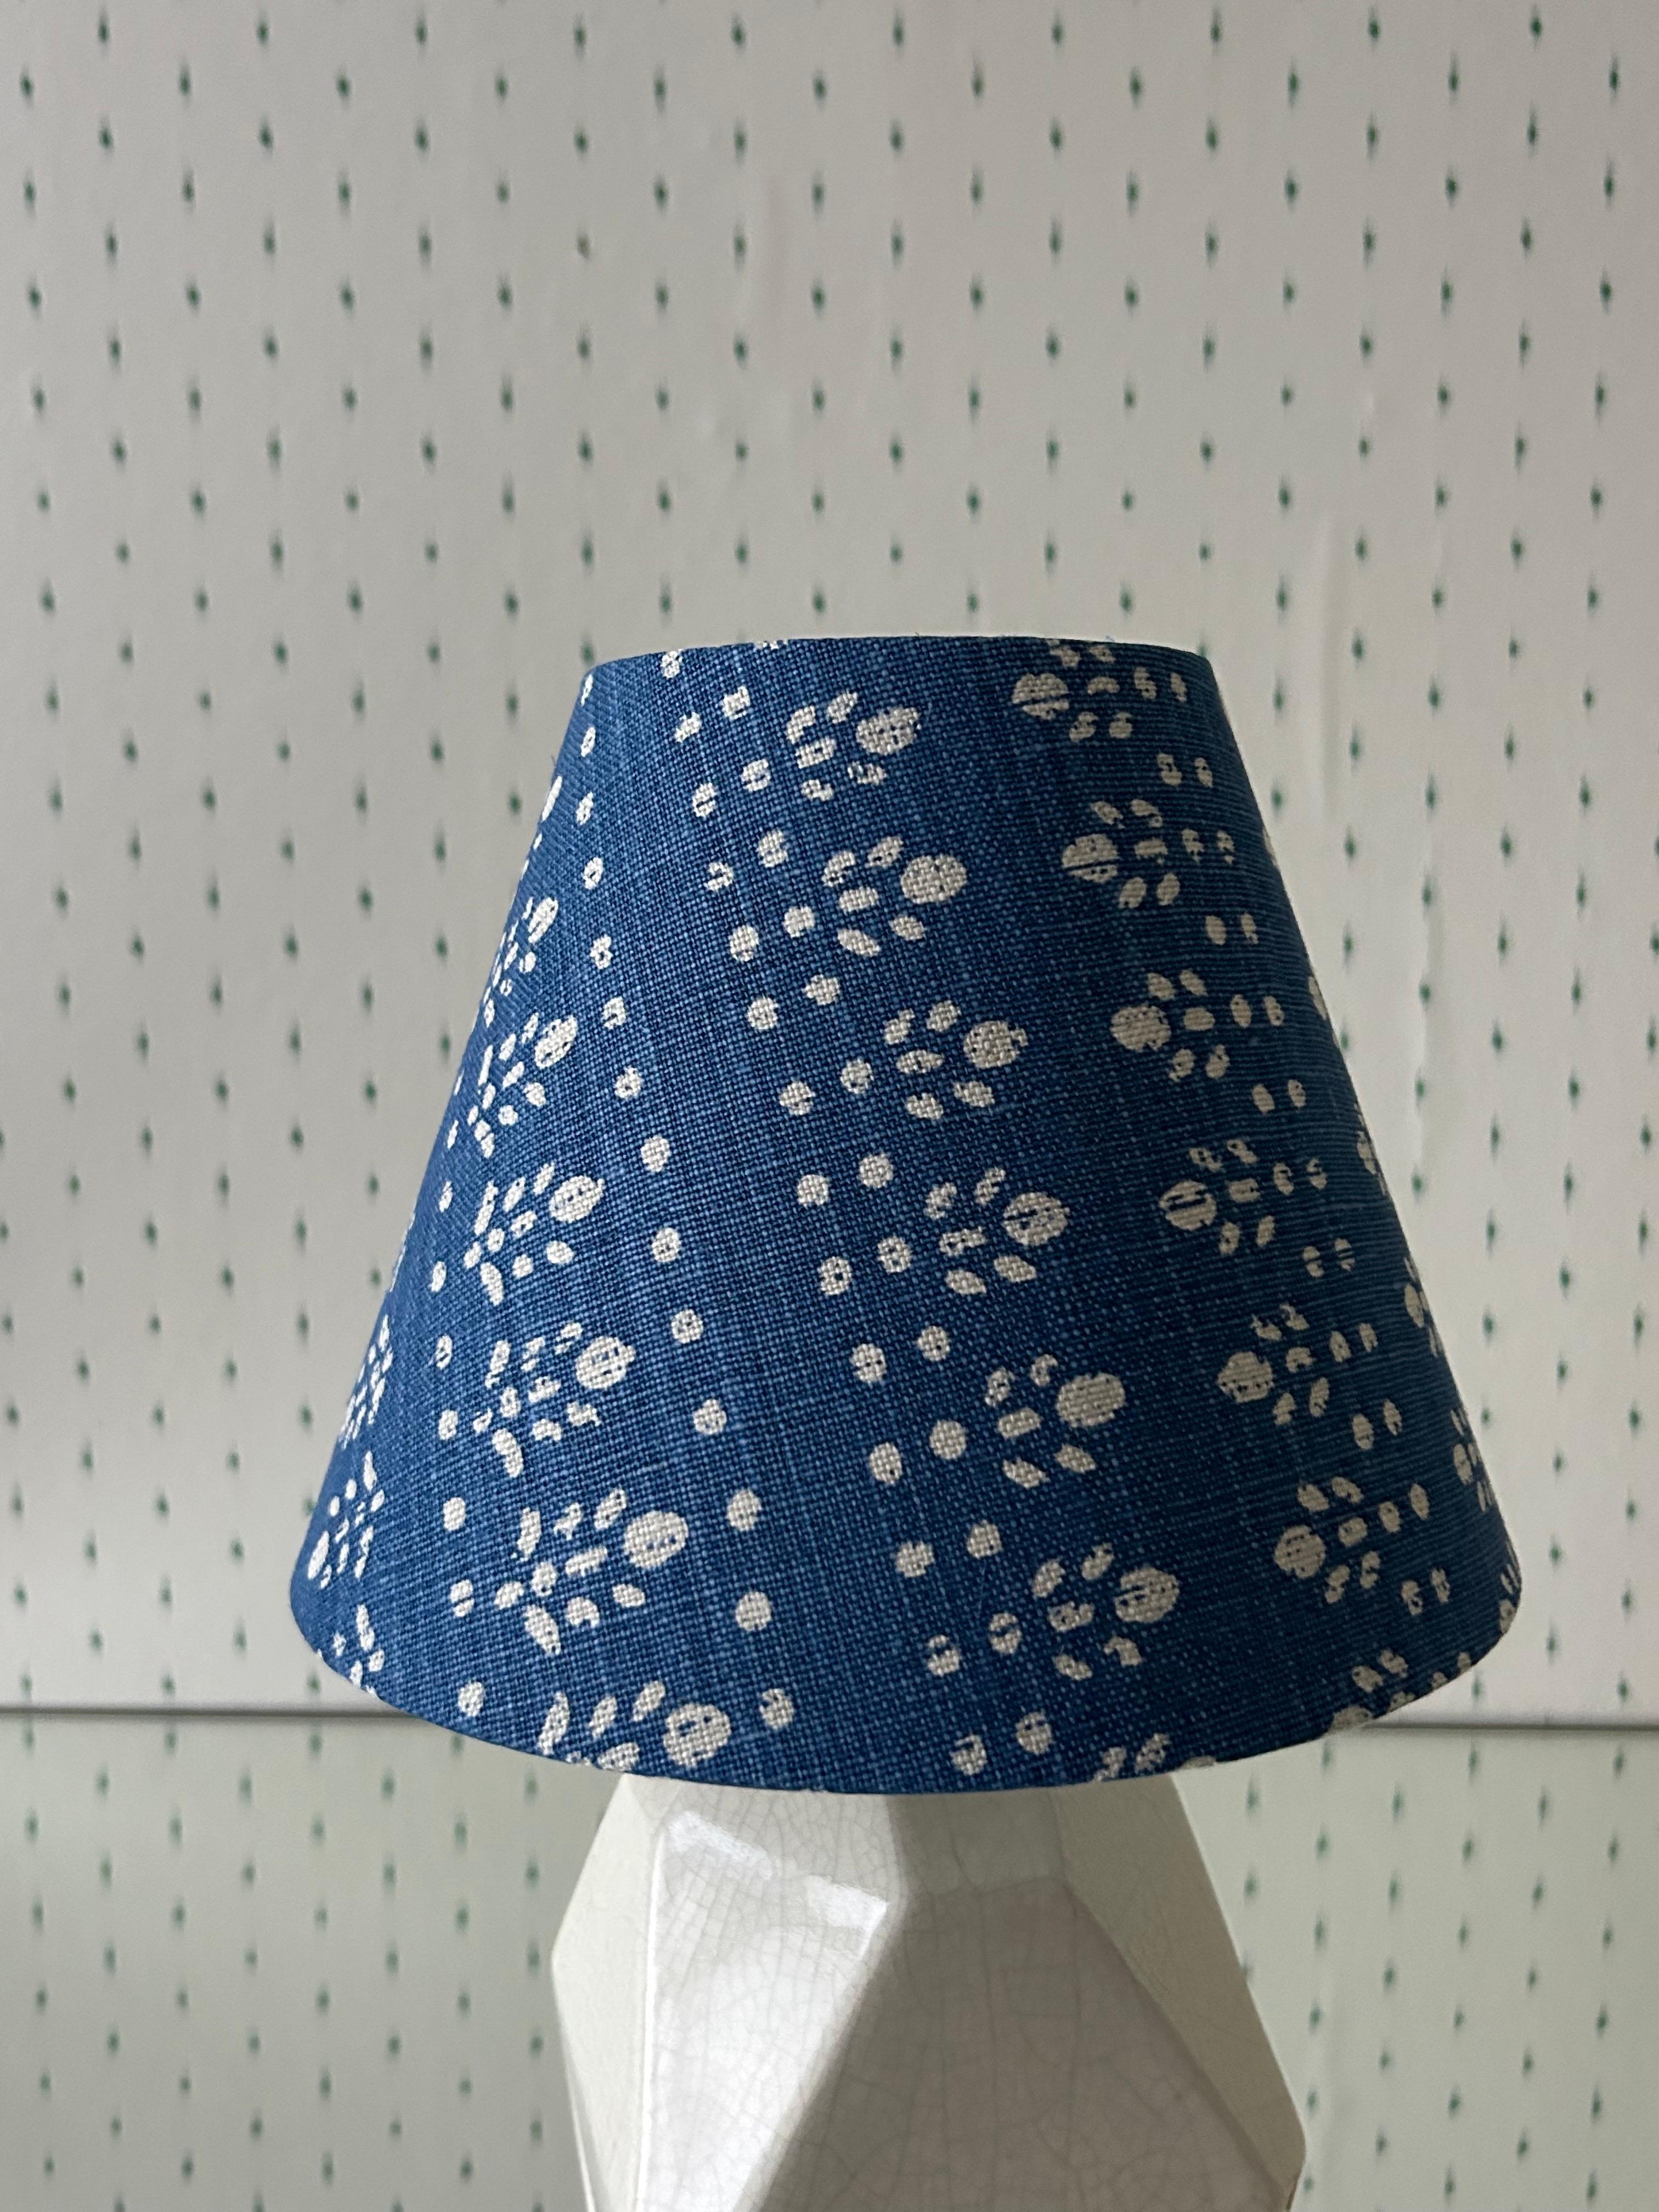 Vintage Ceramic Table Lamp in White with Customized Blue Shade, France, 1920s For Sale 1